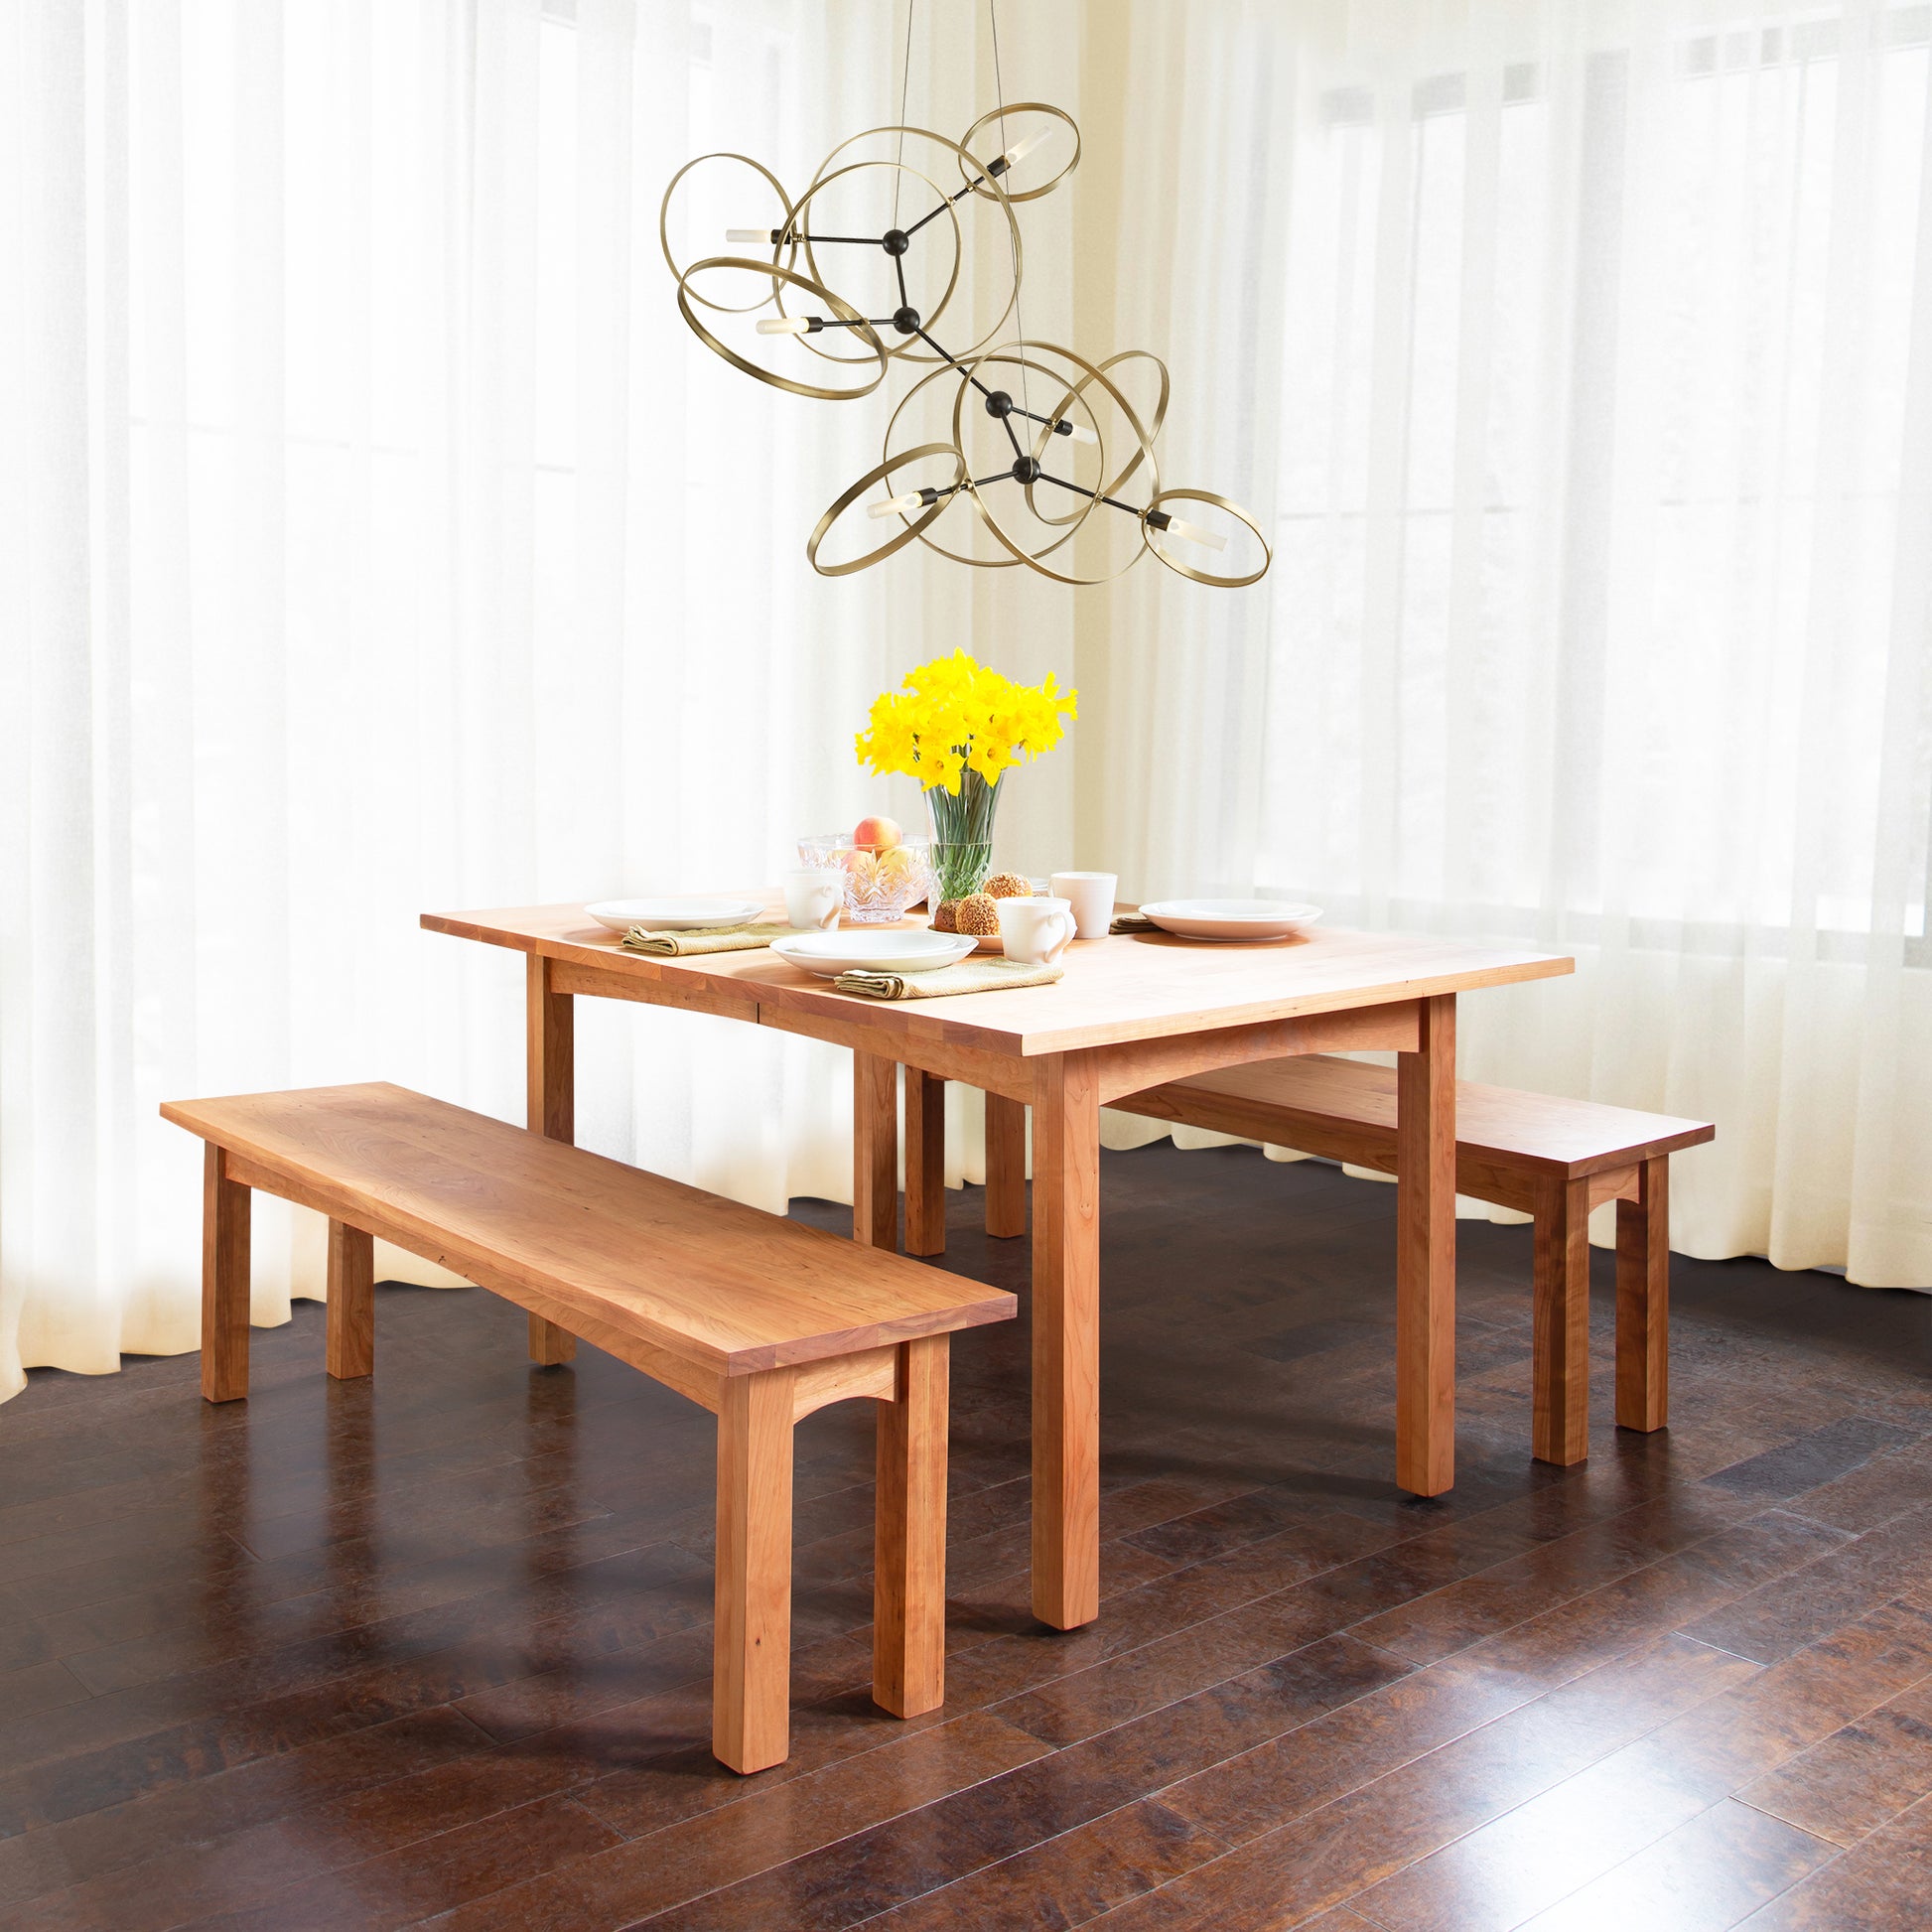 A wooden dining table set from the Vermont Furniture Designs Burlington Shaker Bench Collection, with two Vermont Furniture Designs Burlington Shaker Benches, place settings for two, and a bouquet of yellow flowers under a modern chandelier in a room with